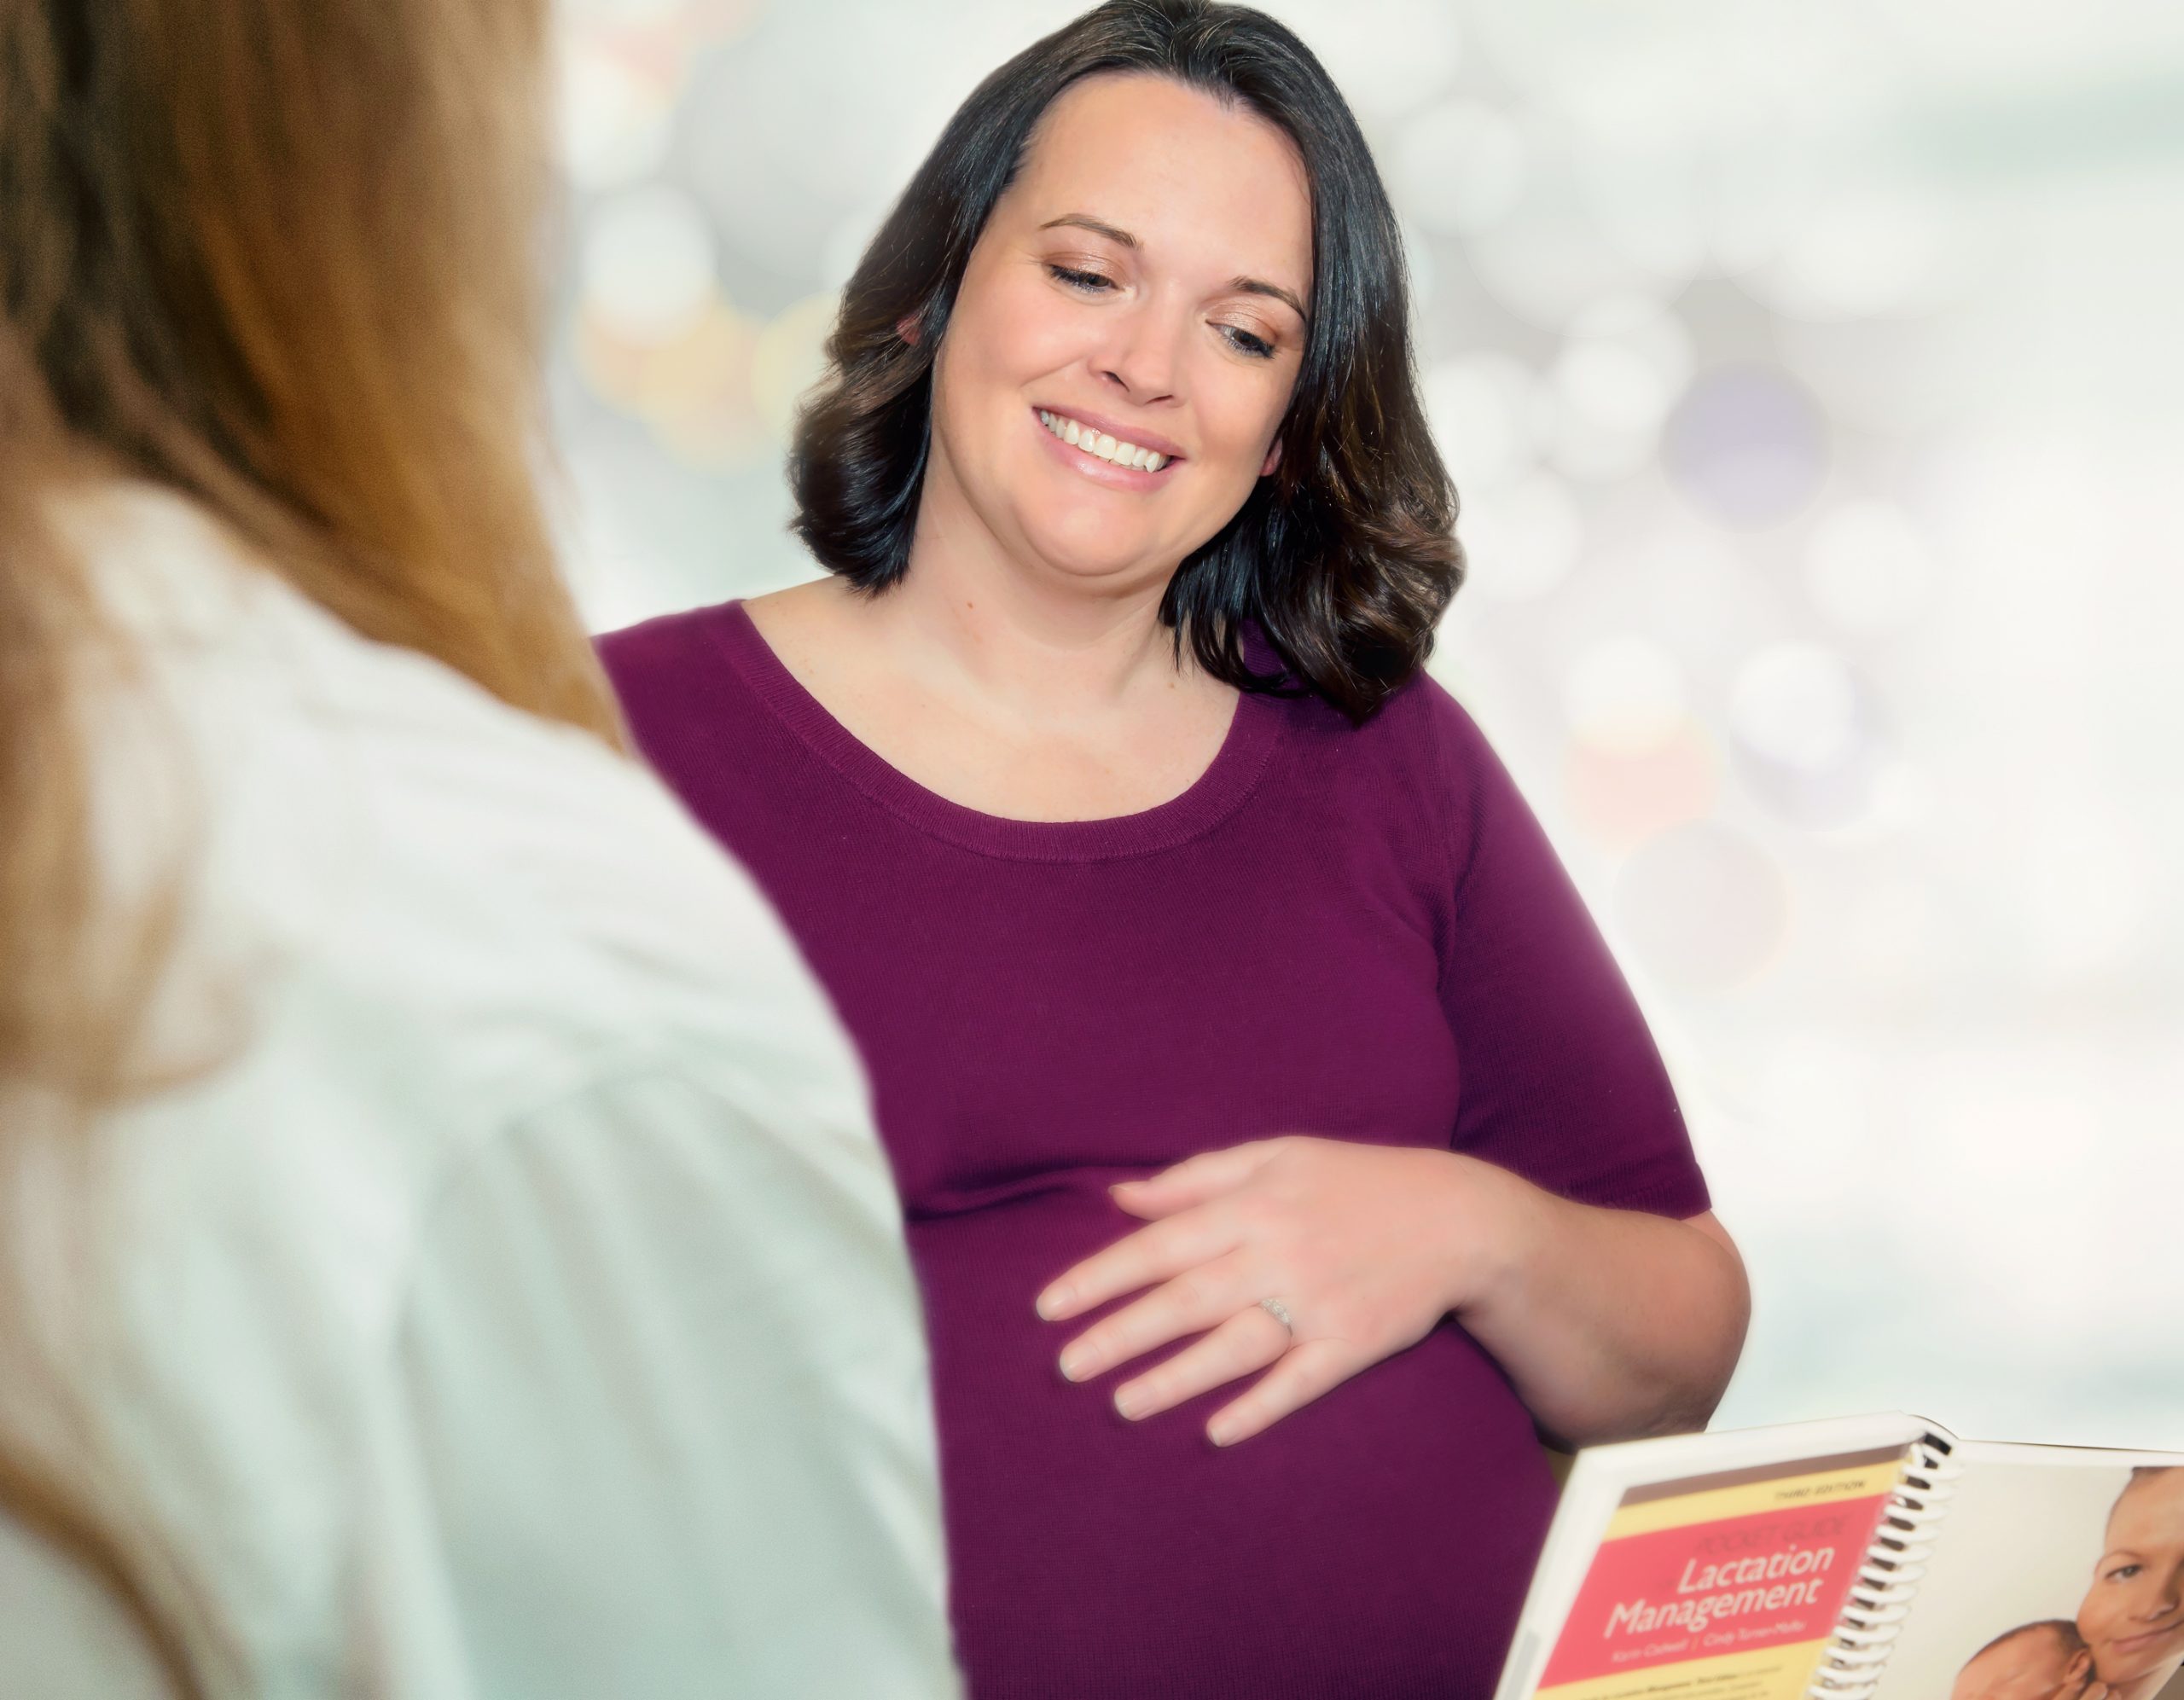 Pregnant woman discussing lactation management with physician